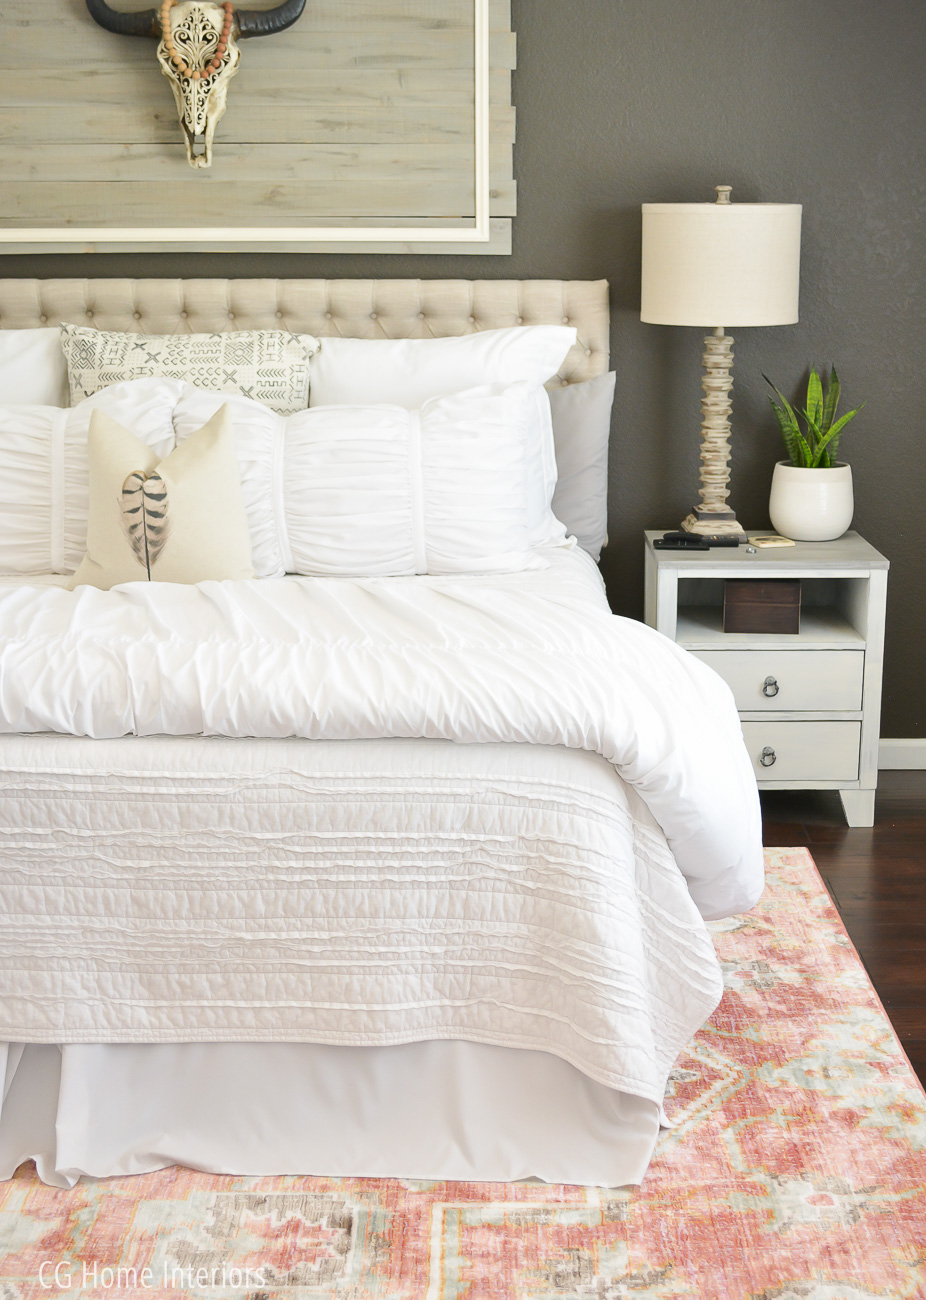 Home remedy on how to keep white bedding white